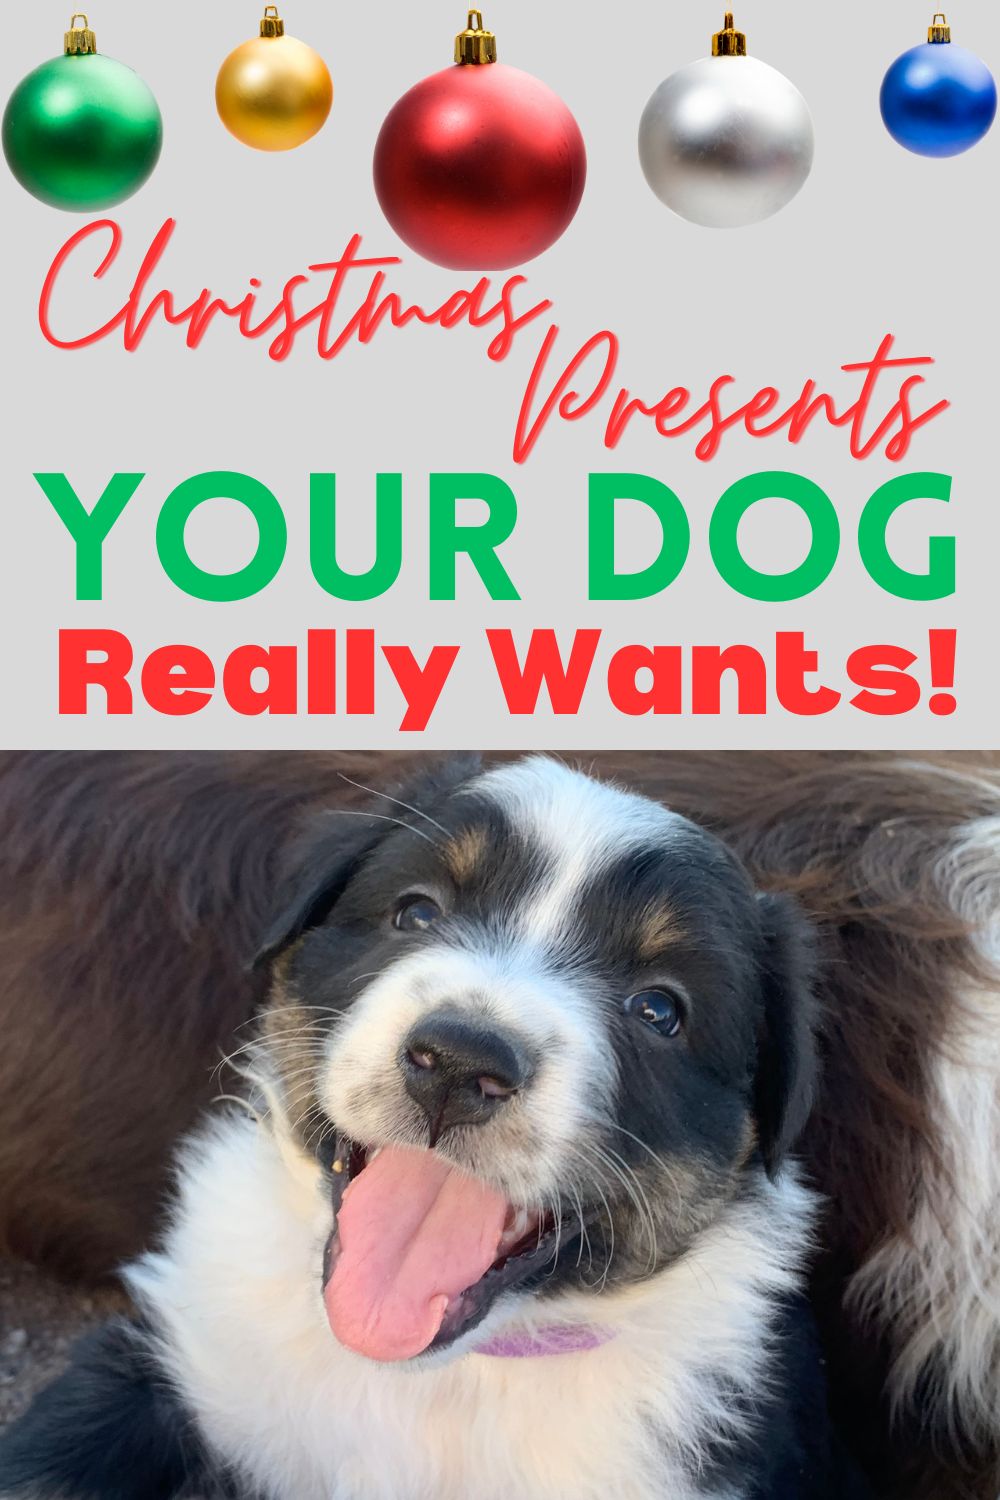 Presents Your Dog Really Wants for Christmas (or just because)!